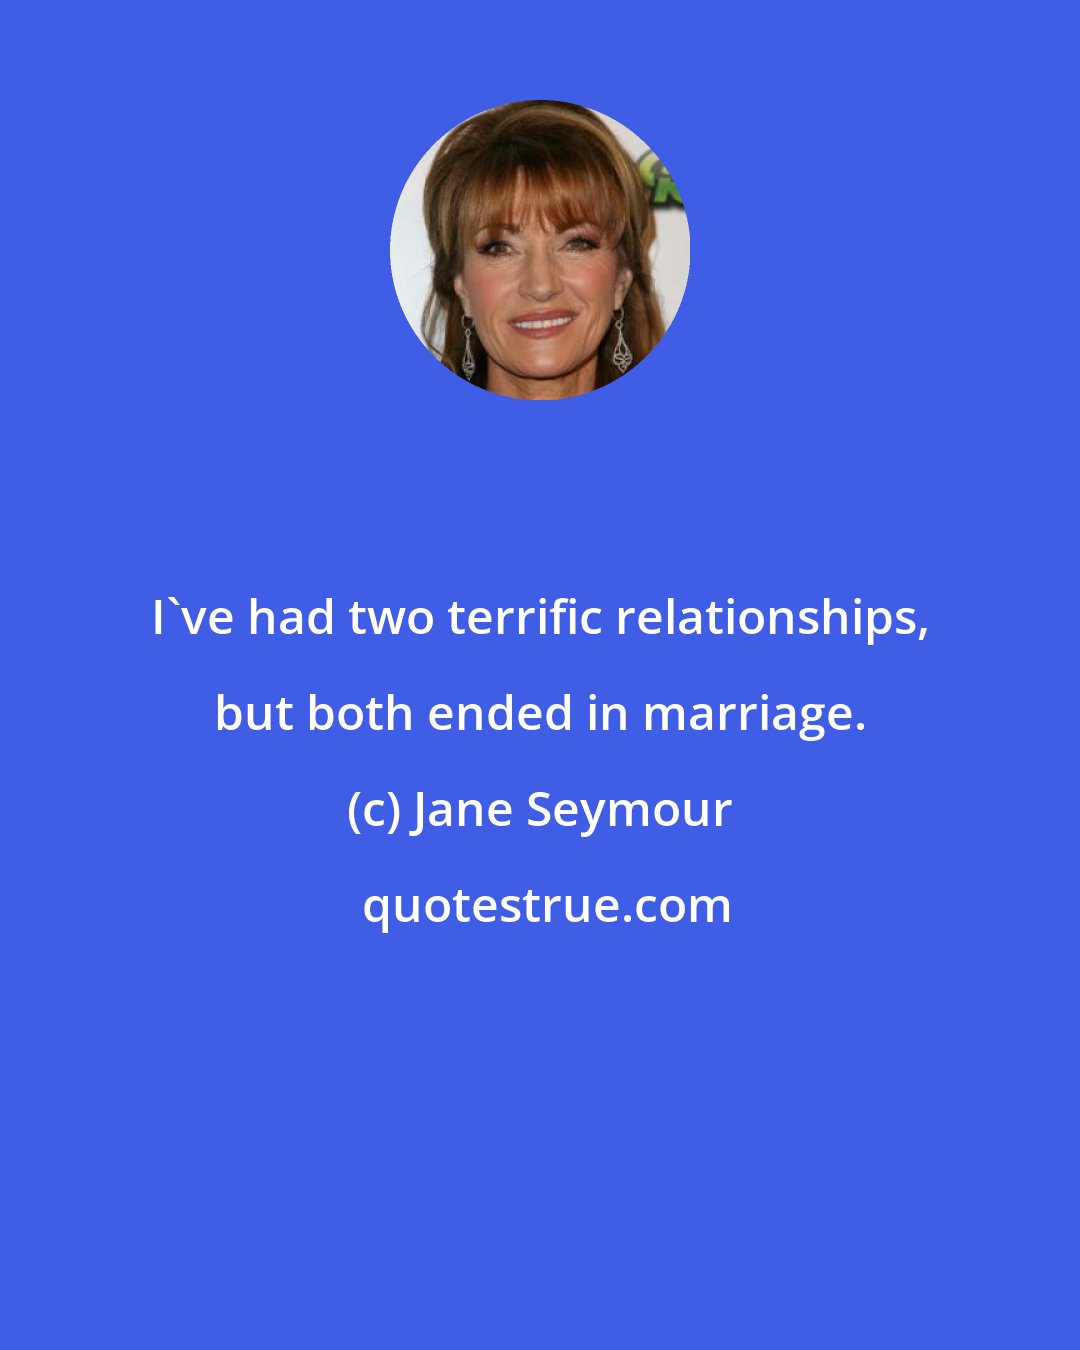 Jane Seymour: I've had two terrific relationships, but both ended in marriage.